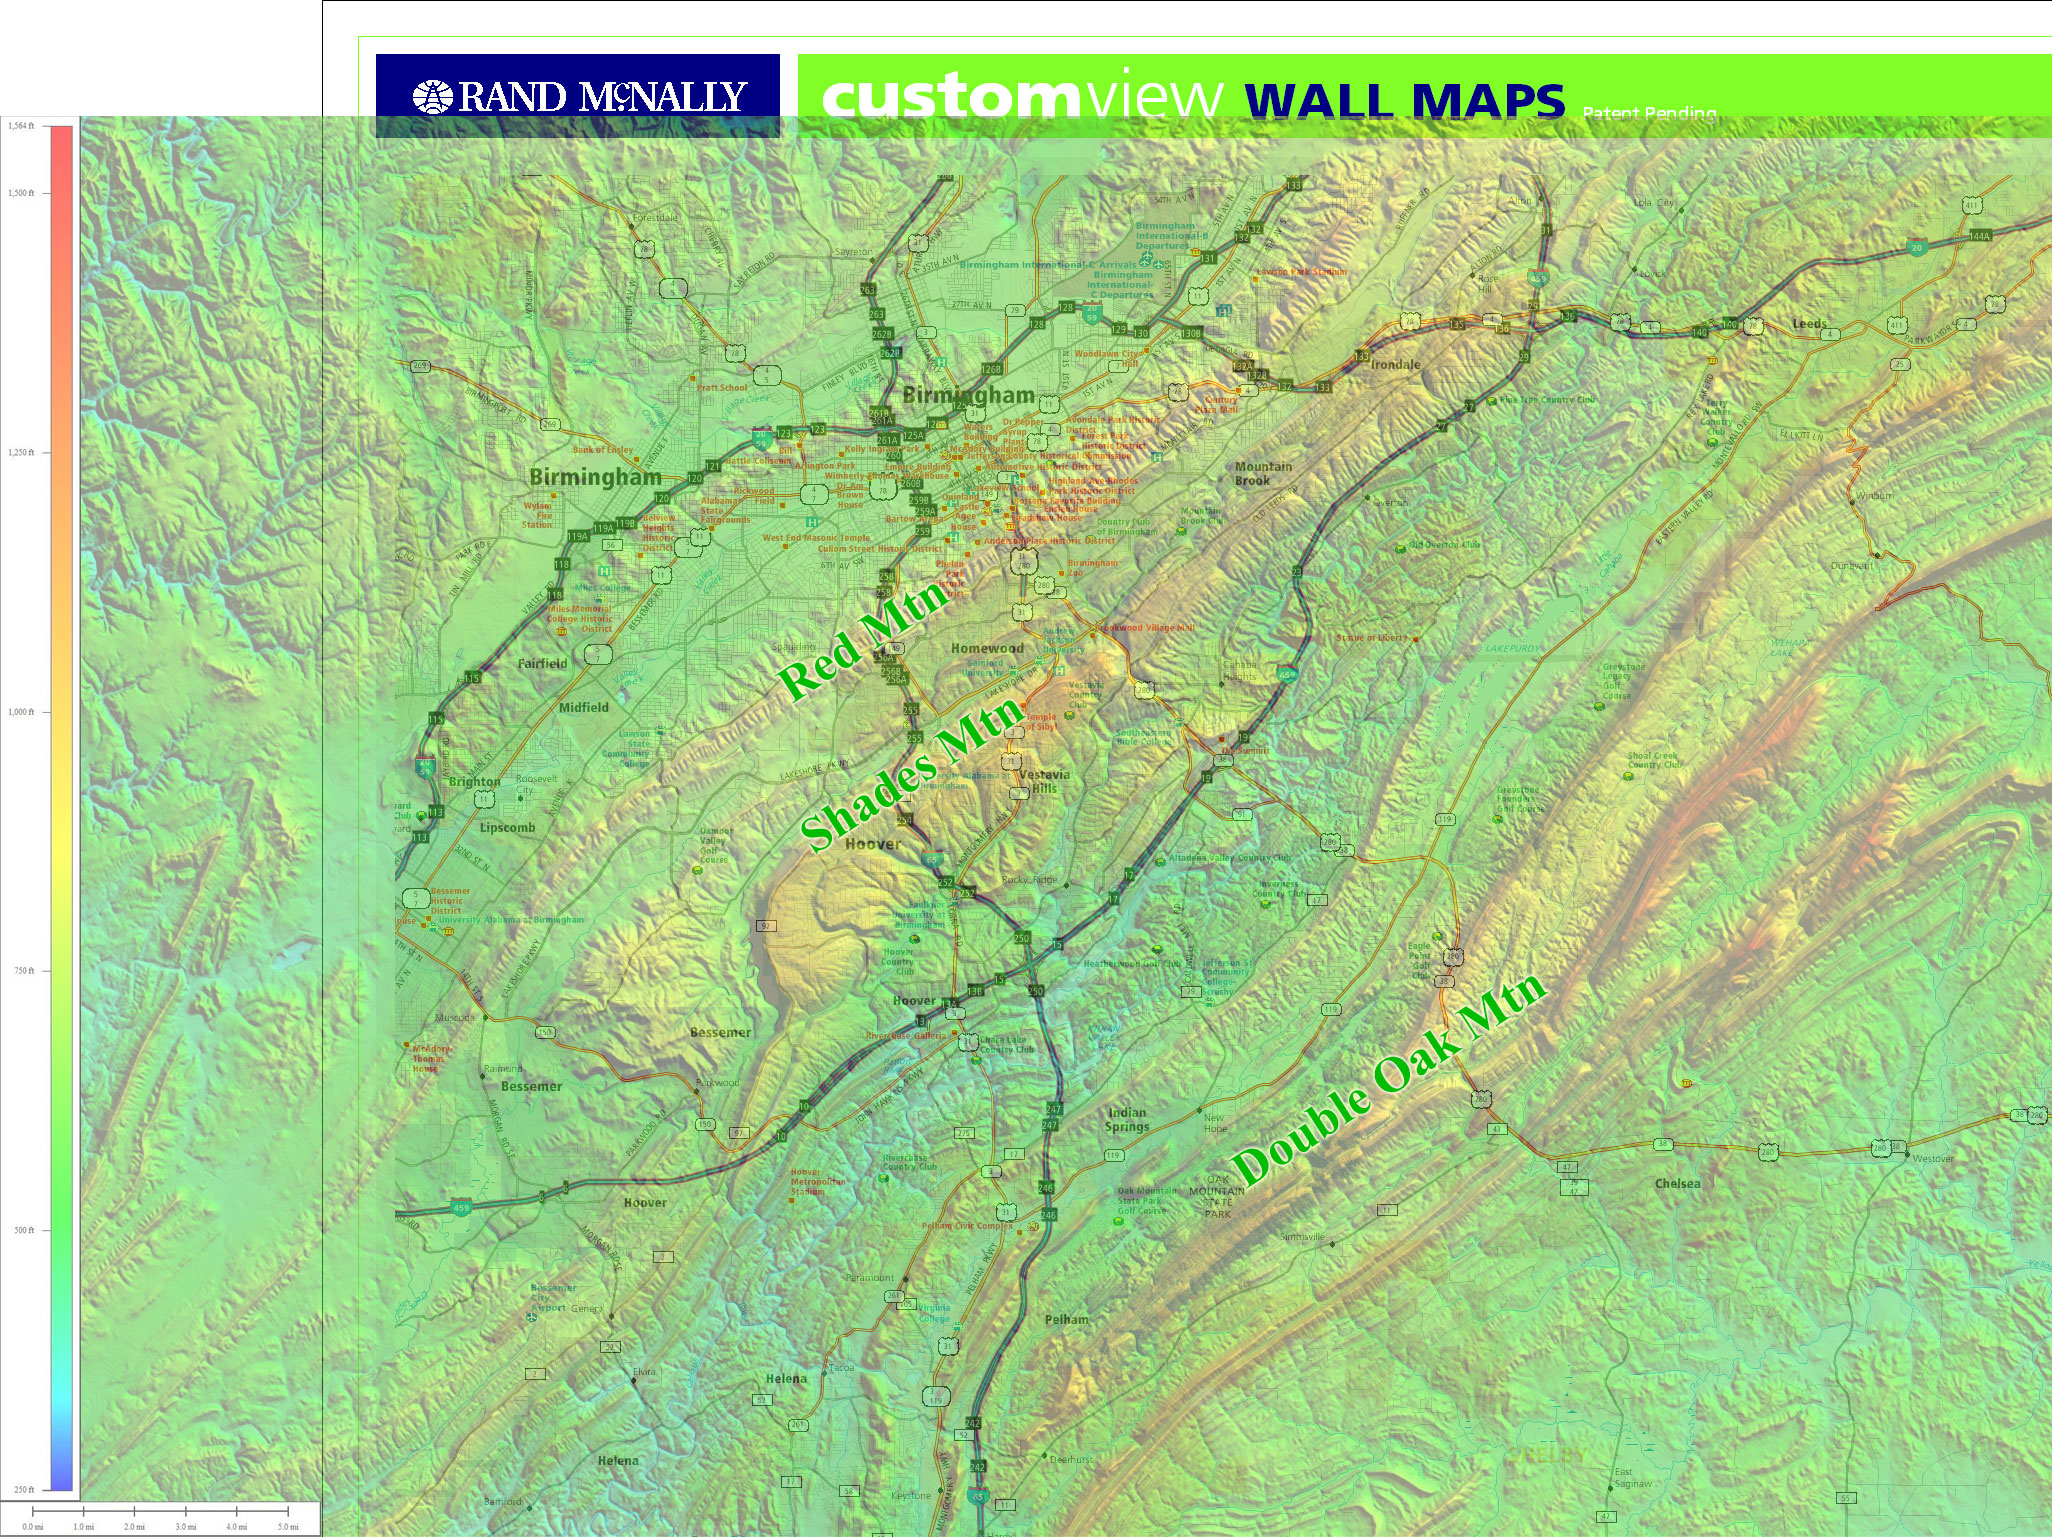 Terrain overlay zoomed into the upper left portion of the map. Colors represent elevations.